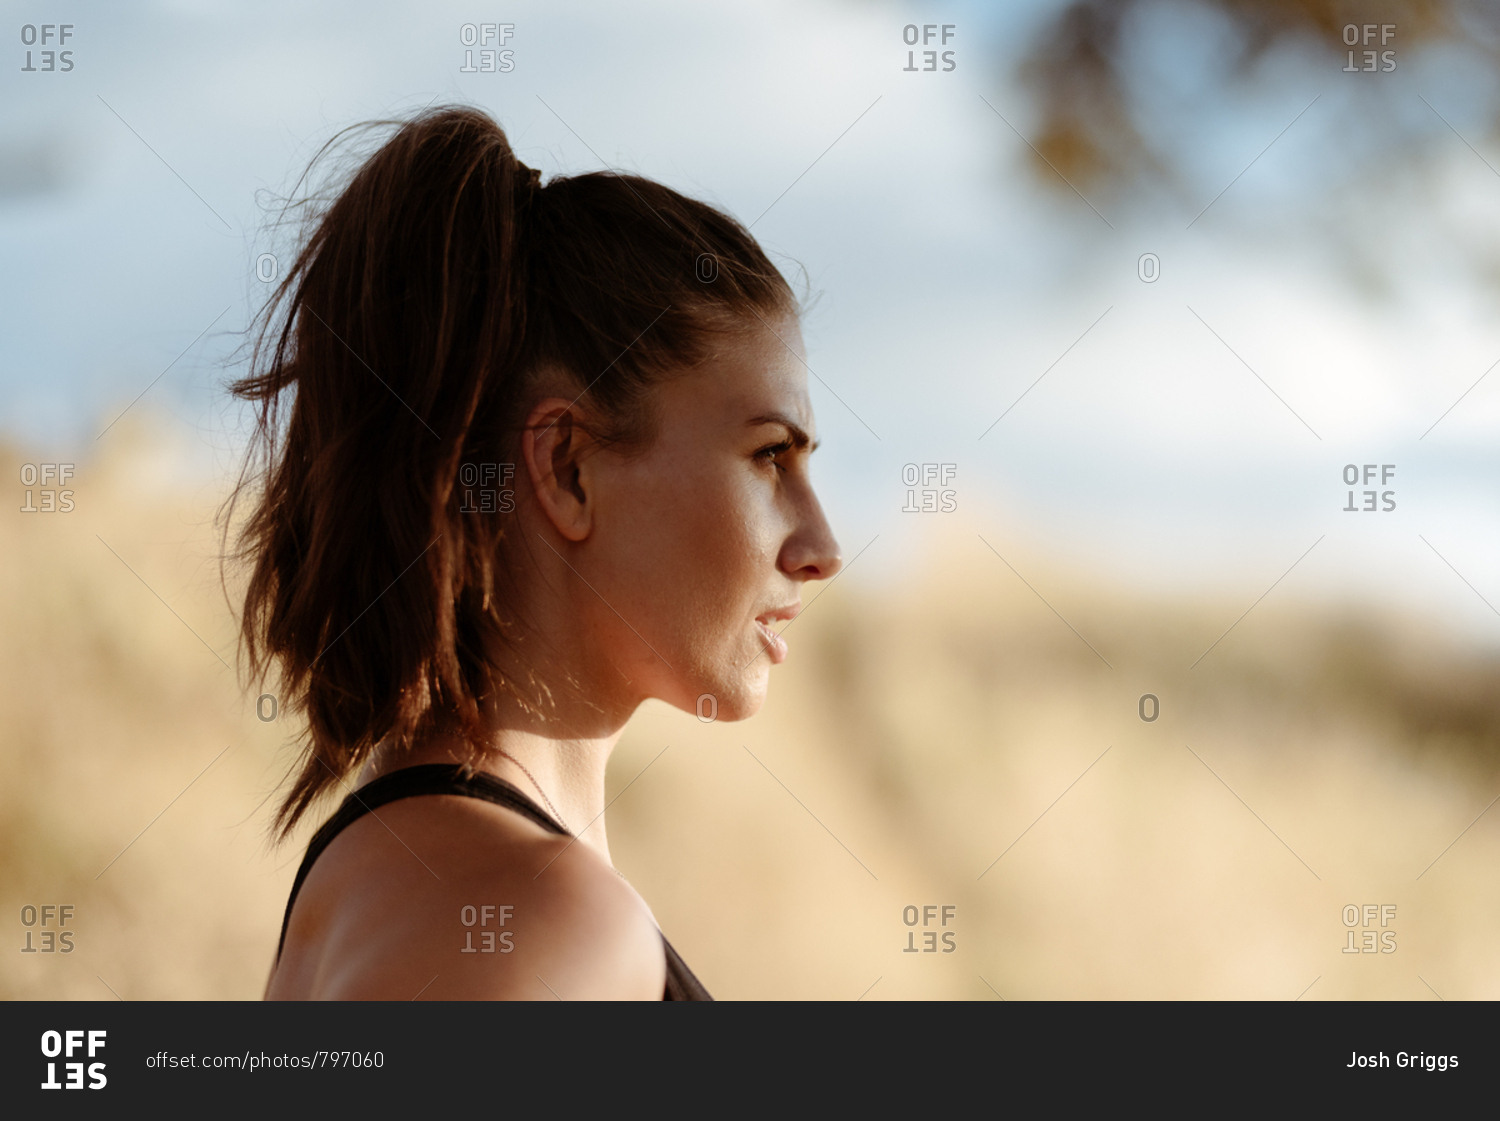 Profile view of young woman in workout clothes